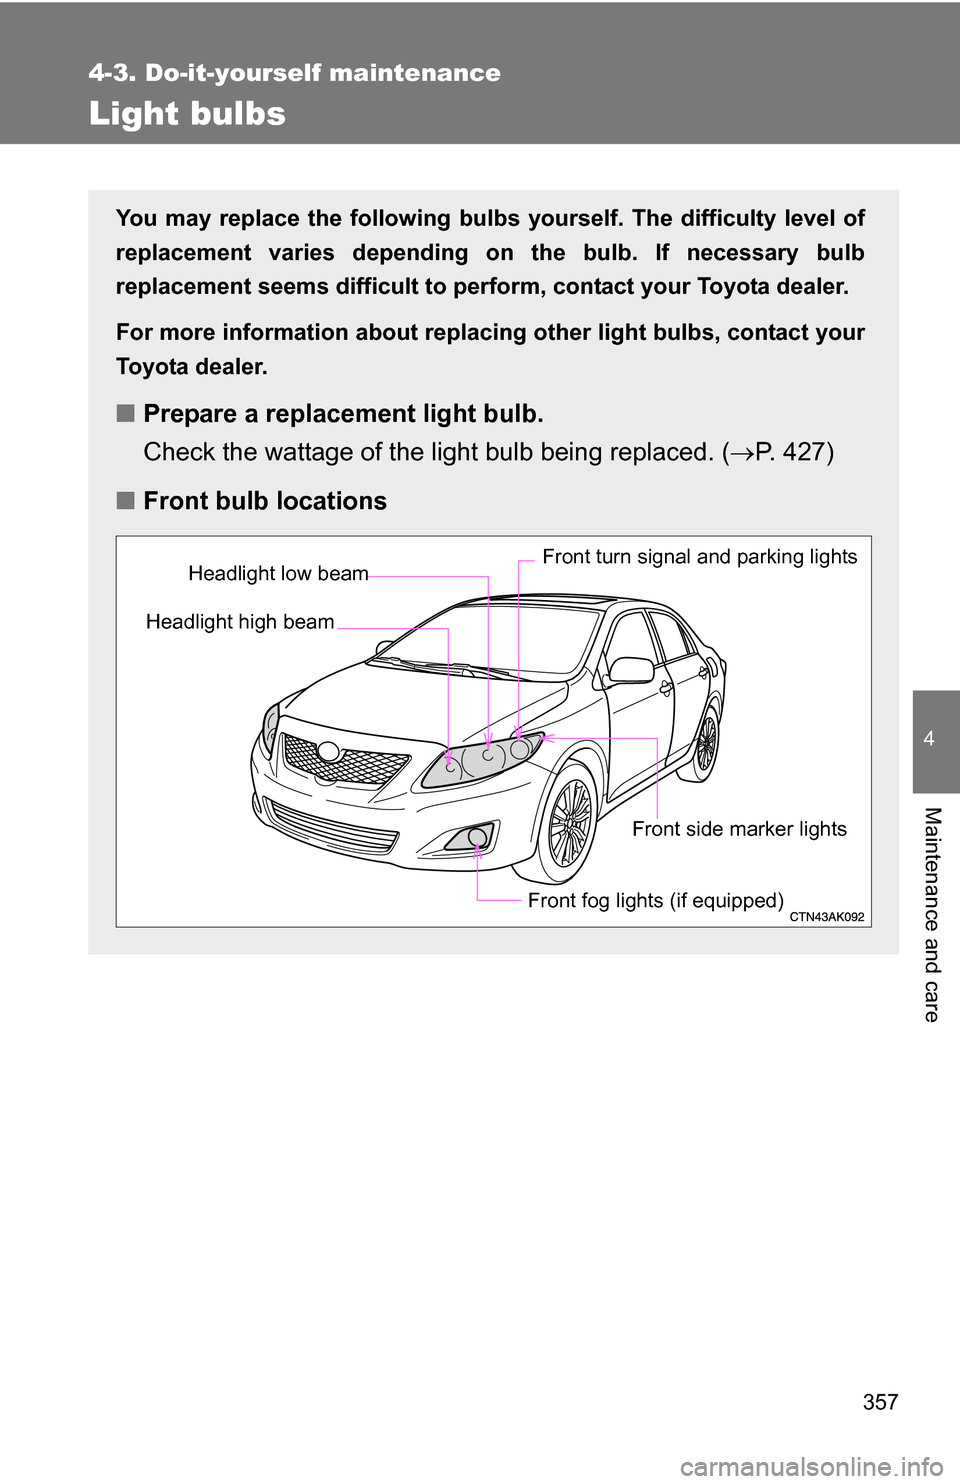 TOYOTA COROLLA 2009 10.G Owners Manual 357
4-3. Do-it-yourself maintenance
4
Maintenance and care
Light bulbs
You may replace the following bulbs yourself. The difficulty level of
replacement varies depending on the bulb. If necessary bulb